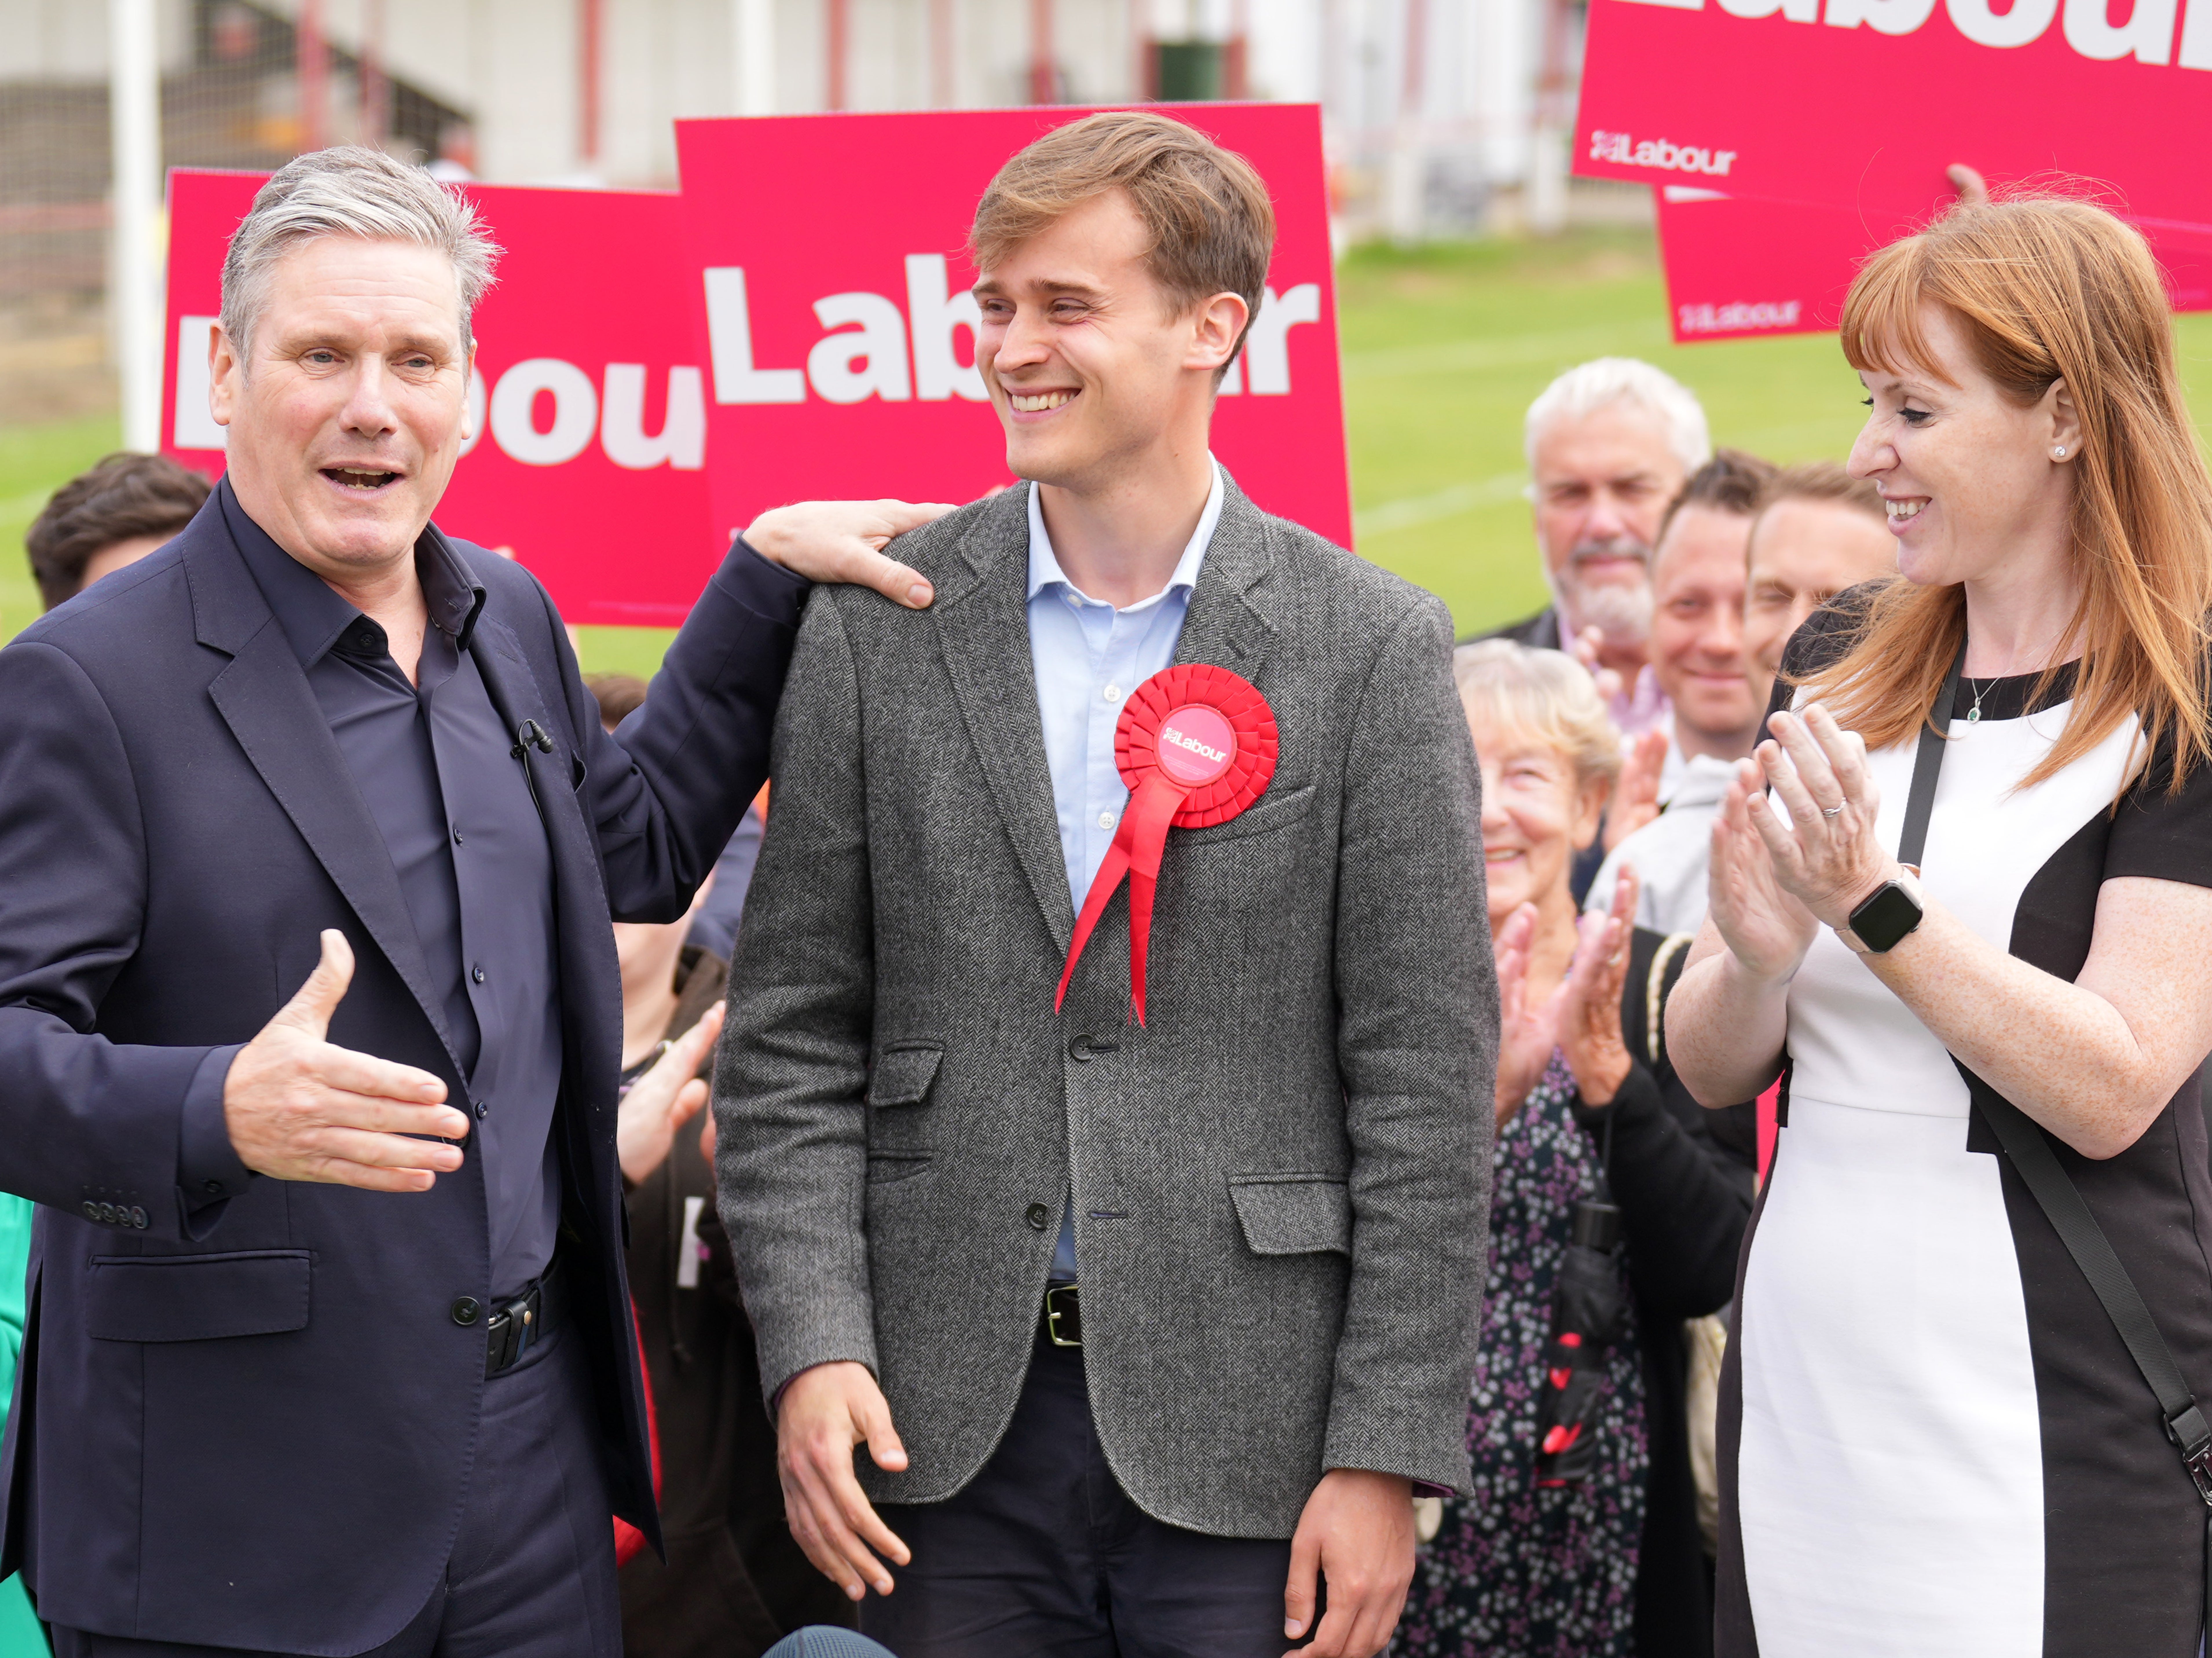 New MP Keir Mather (centre), with Keir Starmer and Angela Rayner